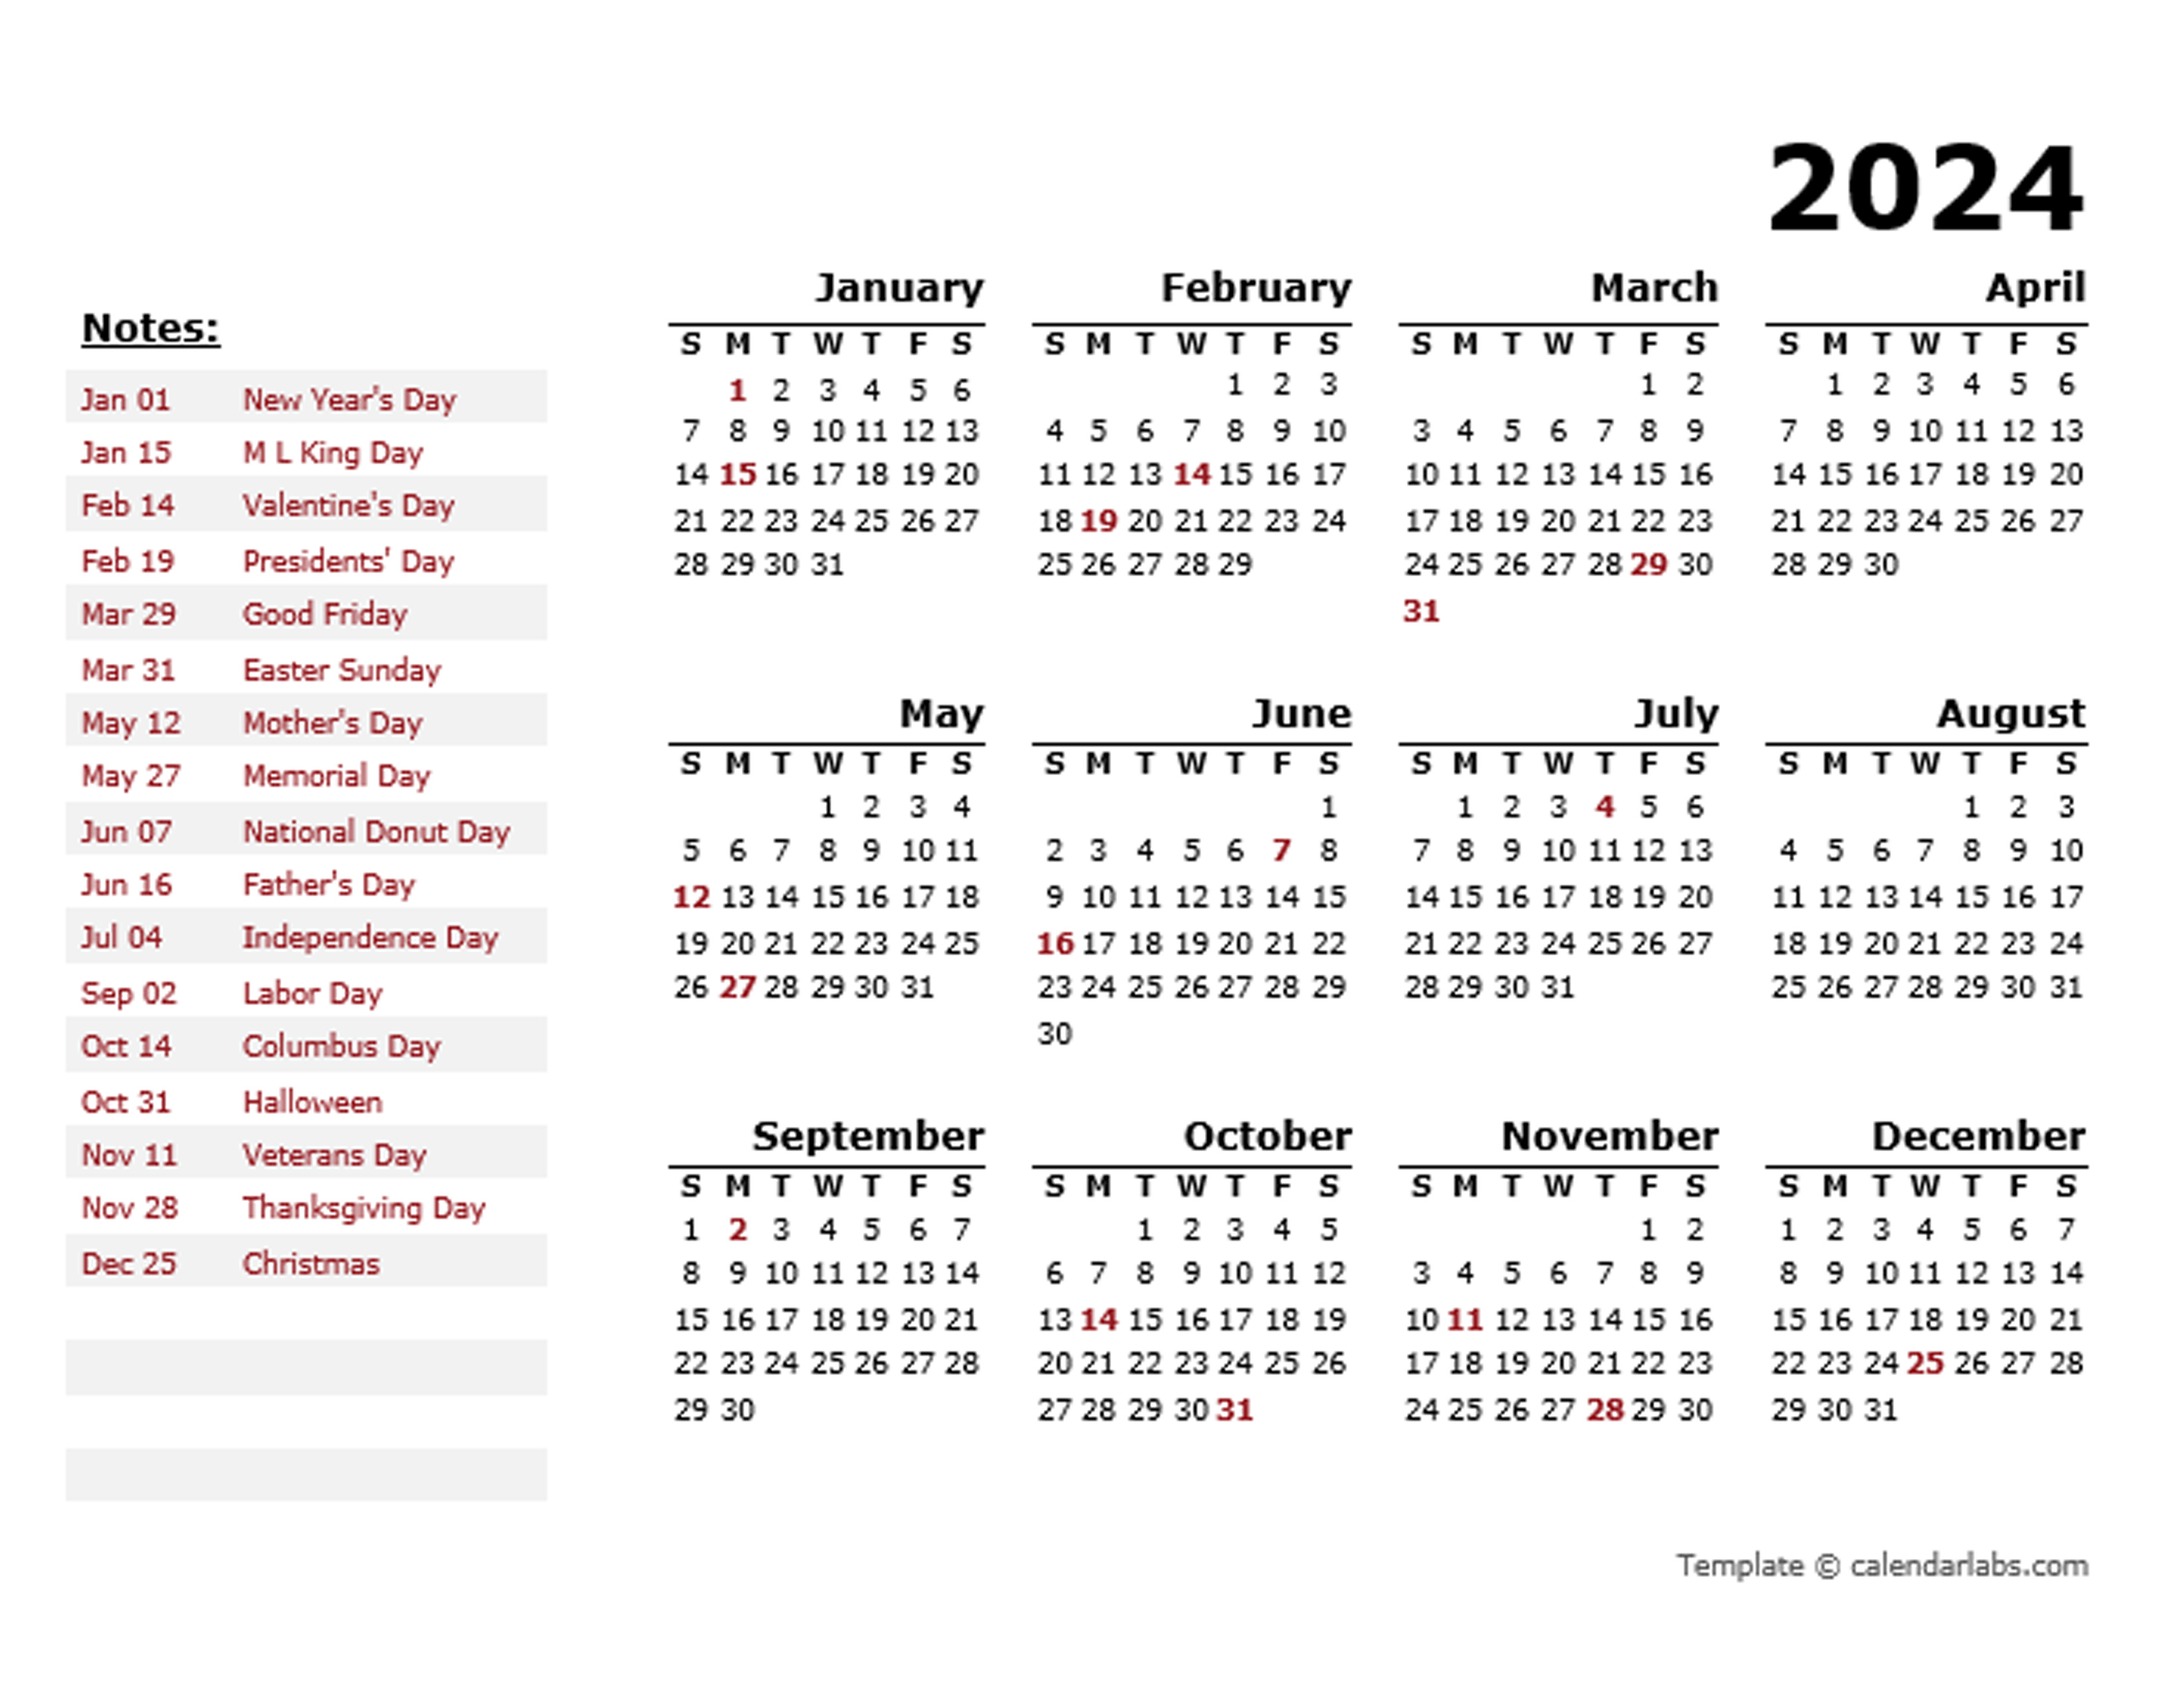 2024 Holiday Calendar Holidays And Observances Meaning List Blake Katine